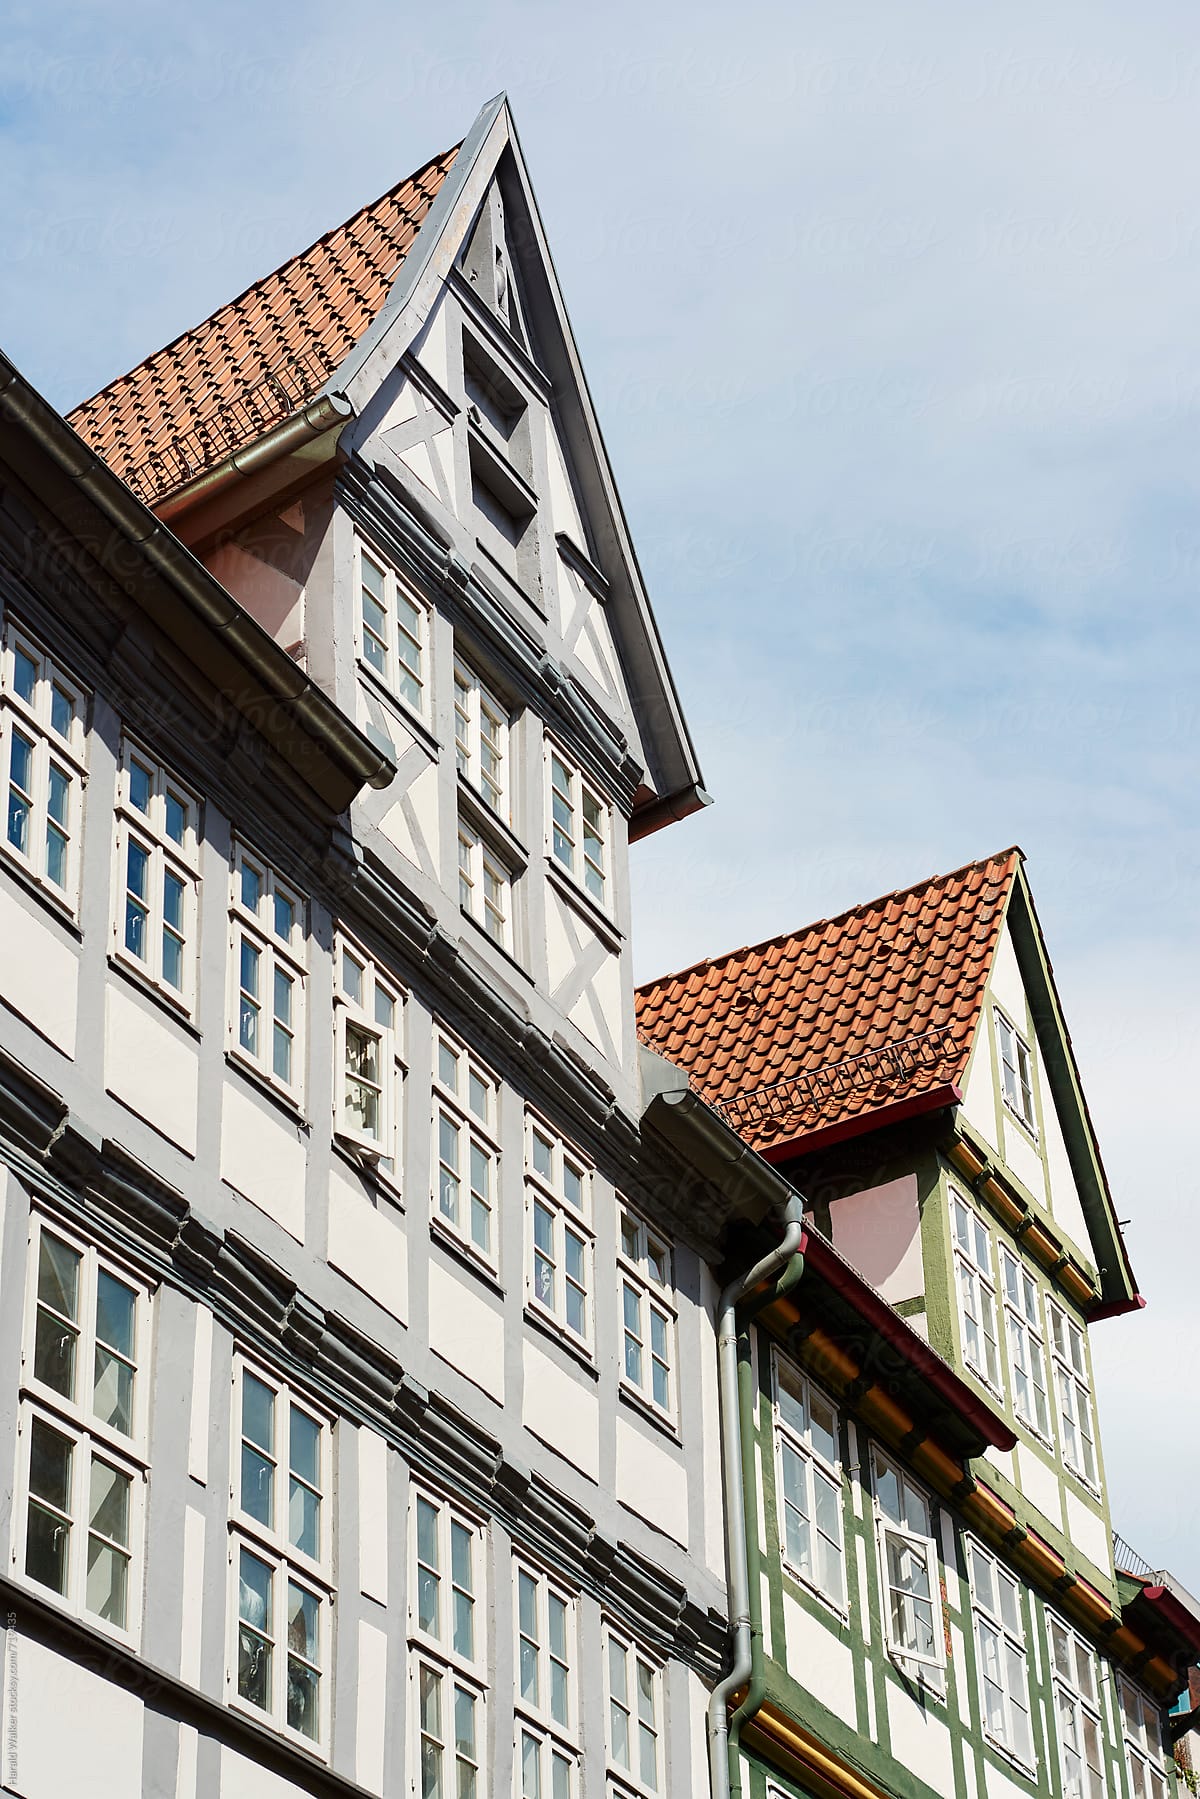 Gables of half-timbered houses